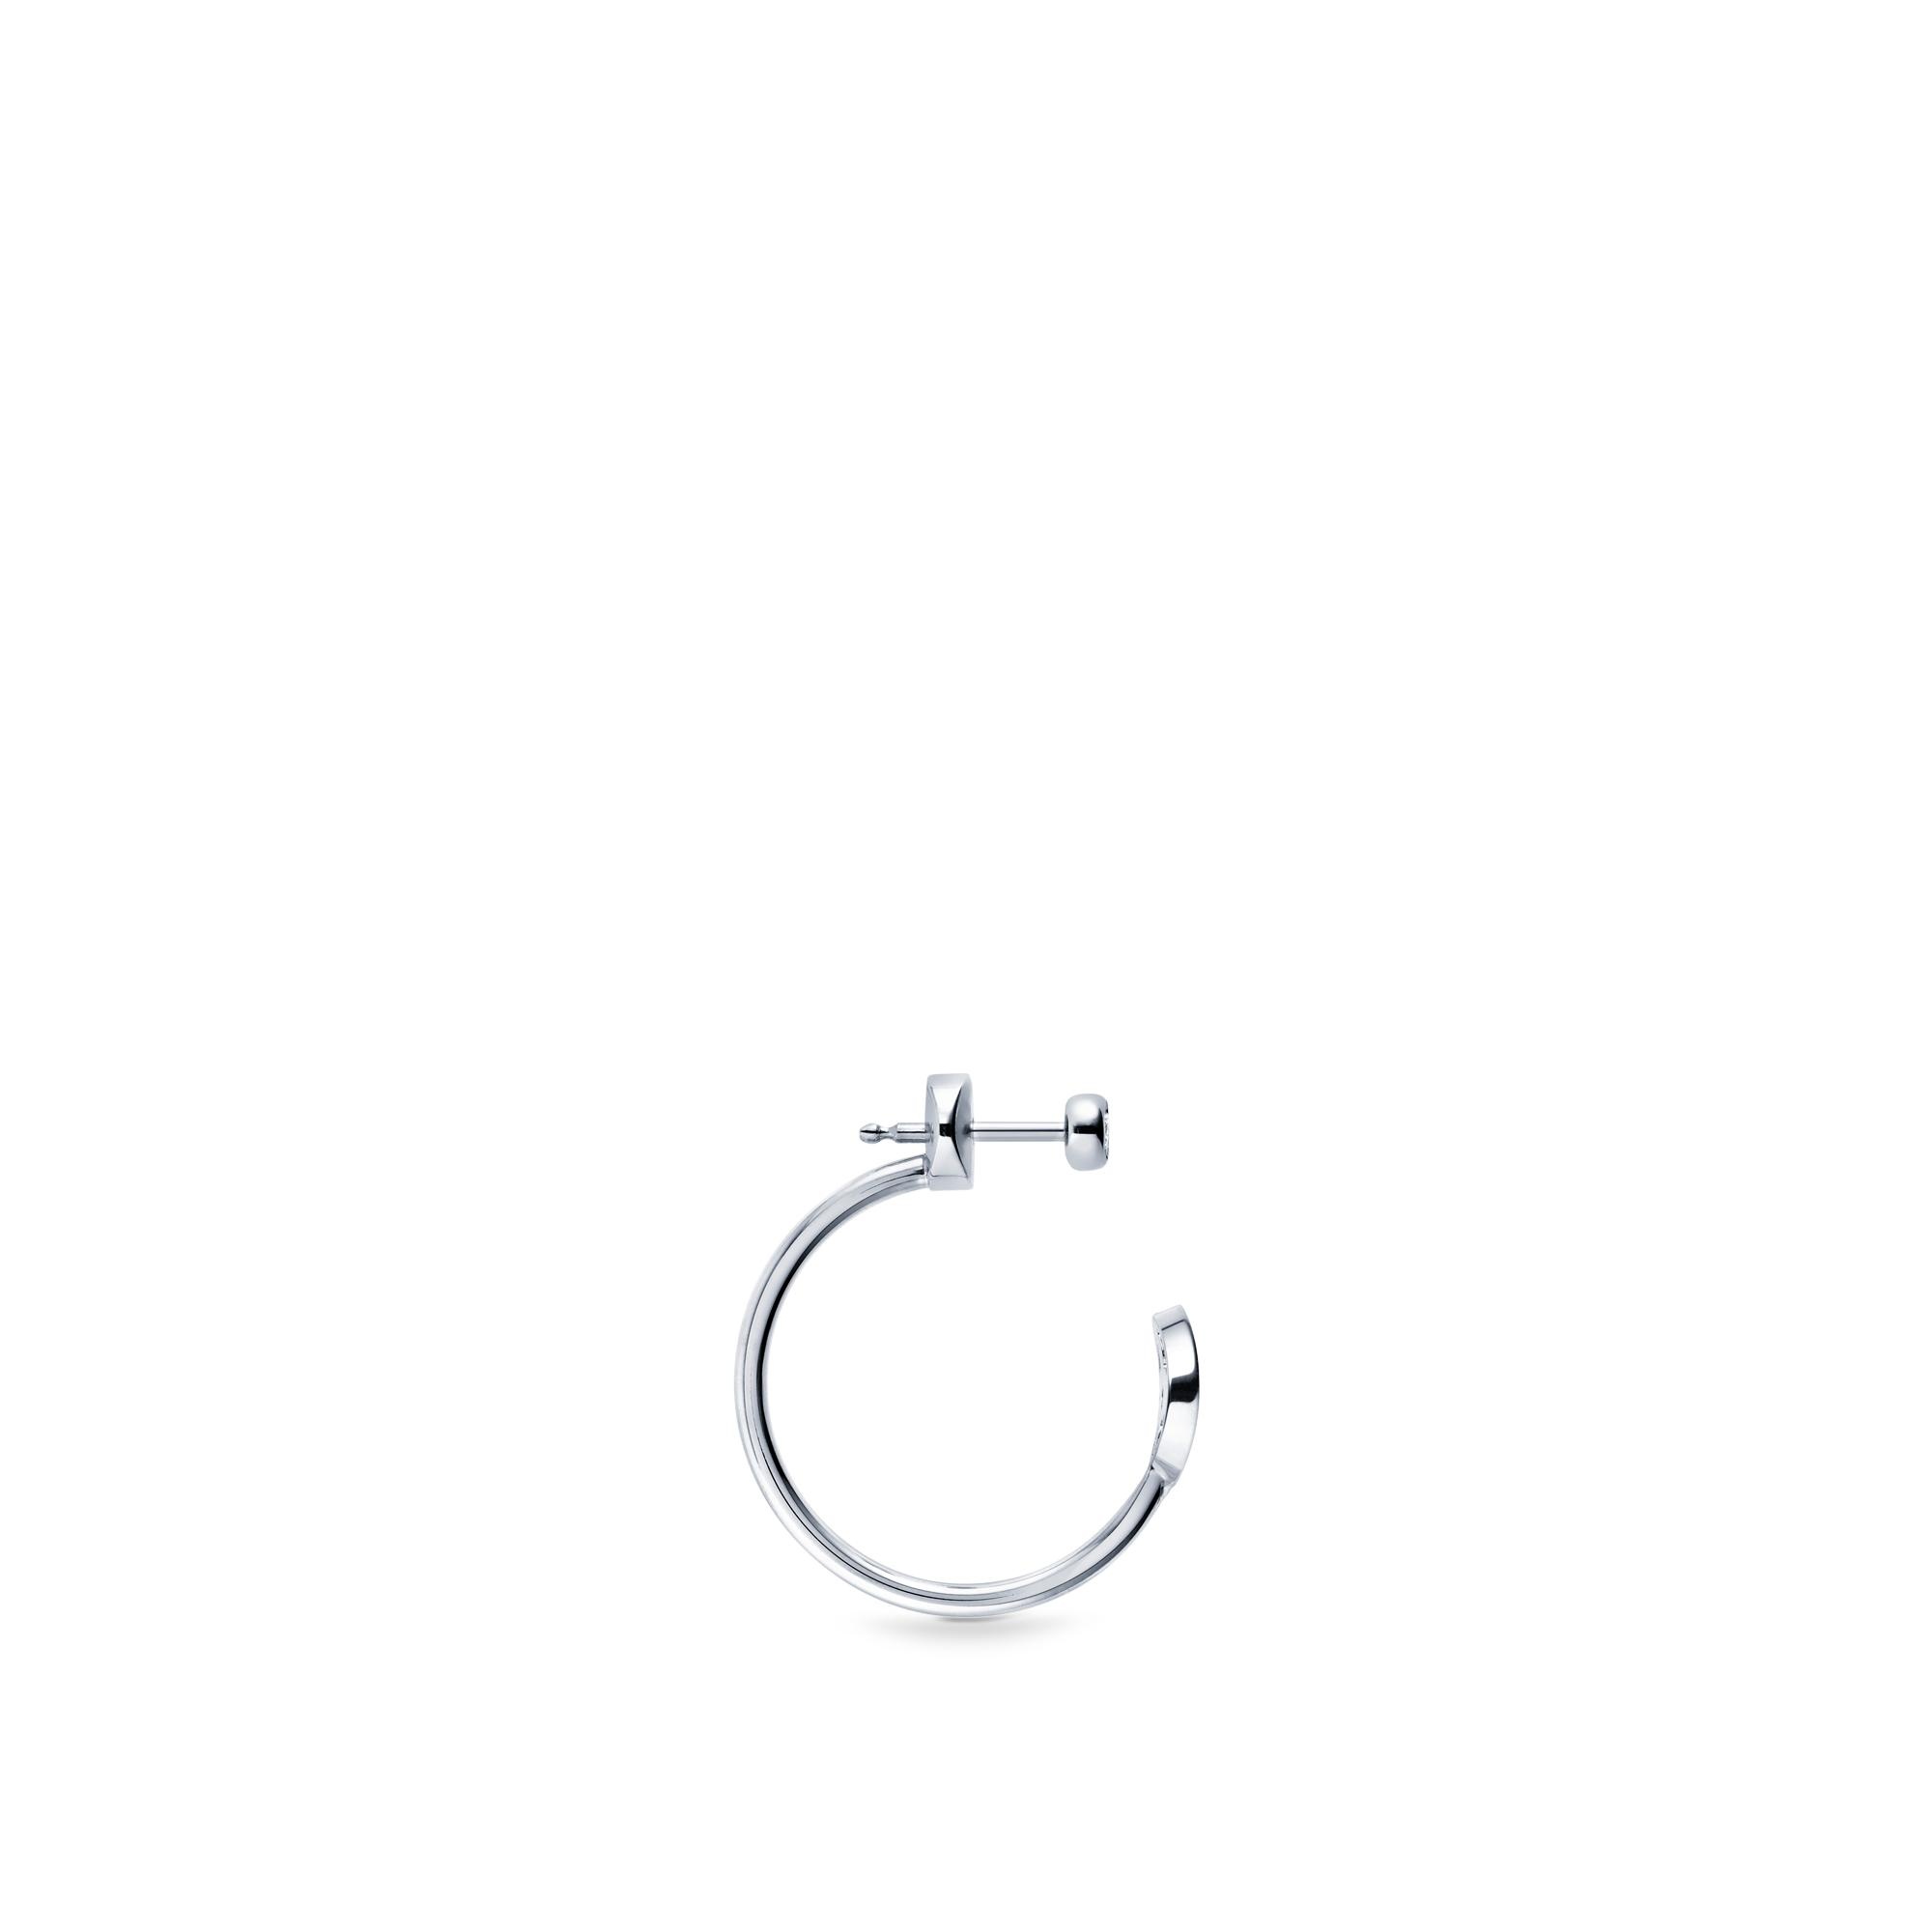 Louis Vuitton Idylle Blossom Small Hoop, White Gold and Diamond - per Unit Grey. Size NSA